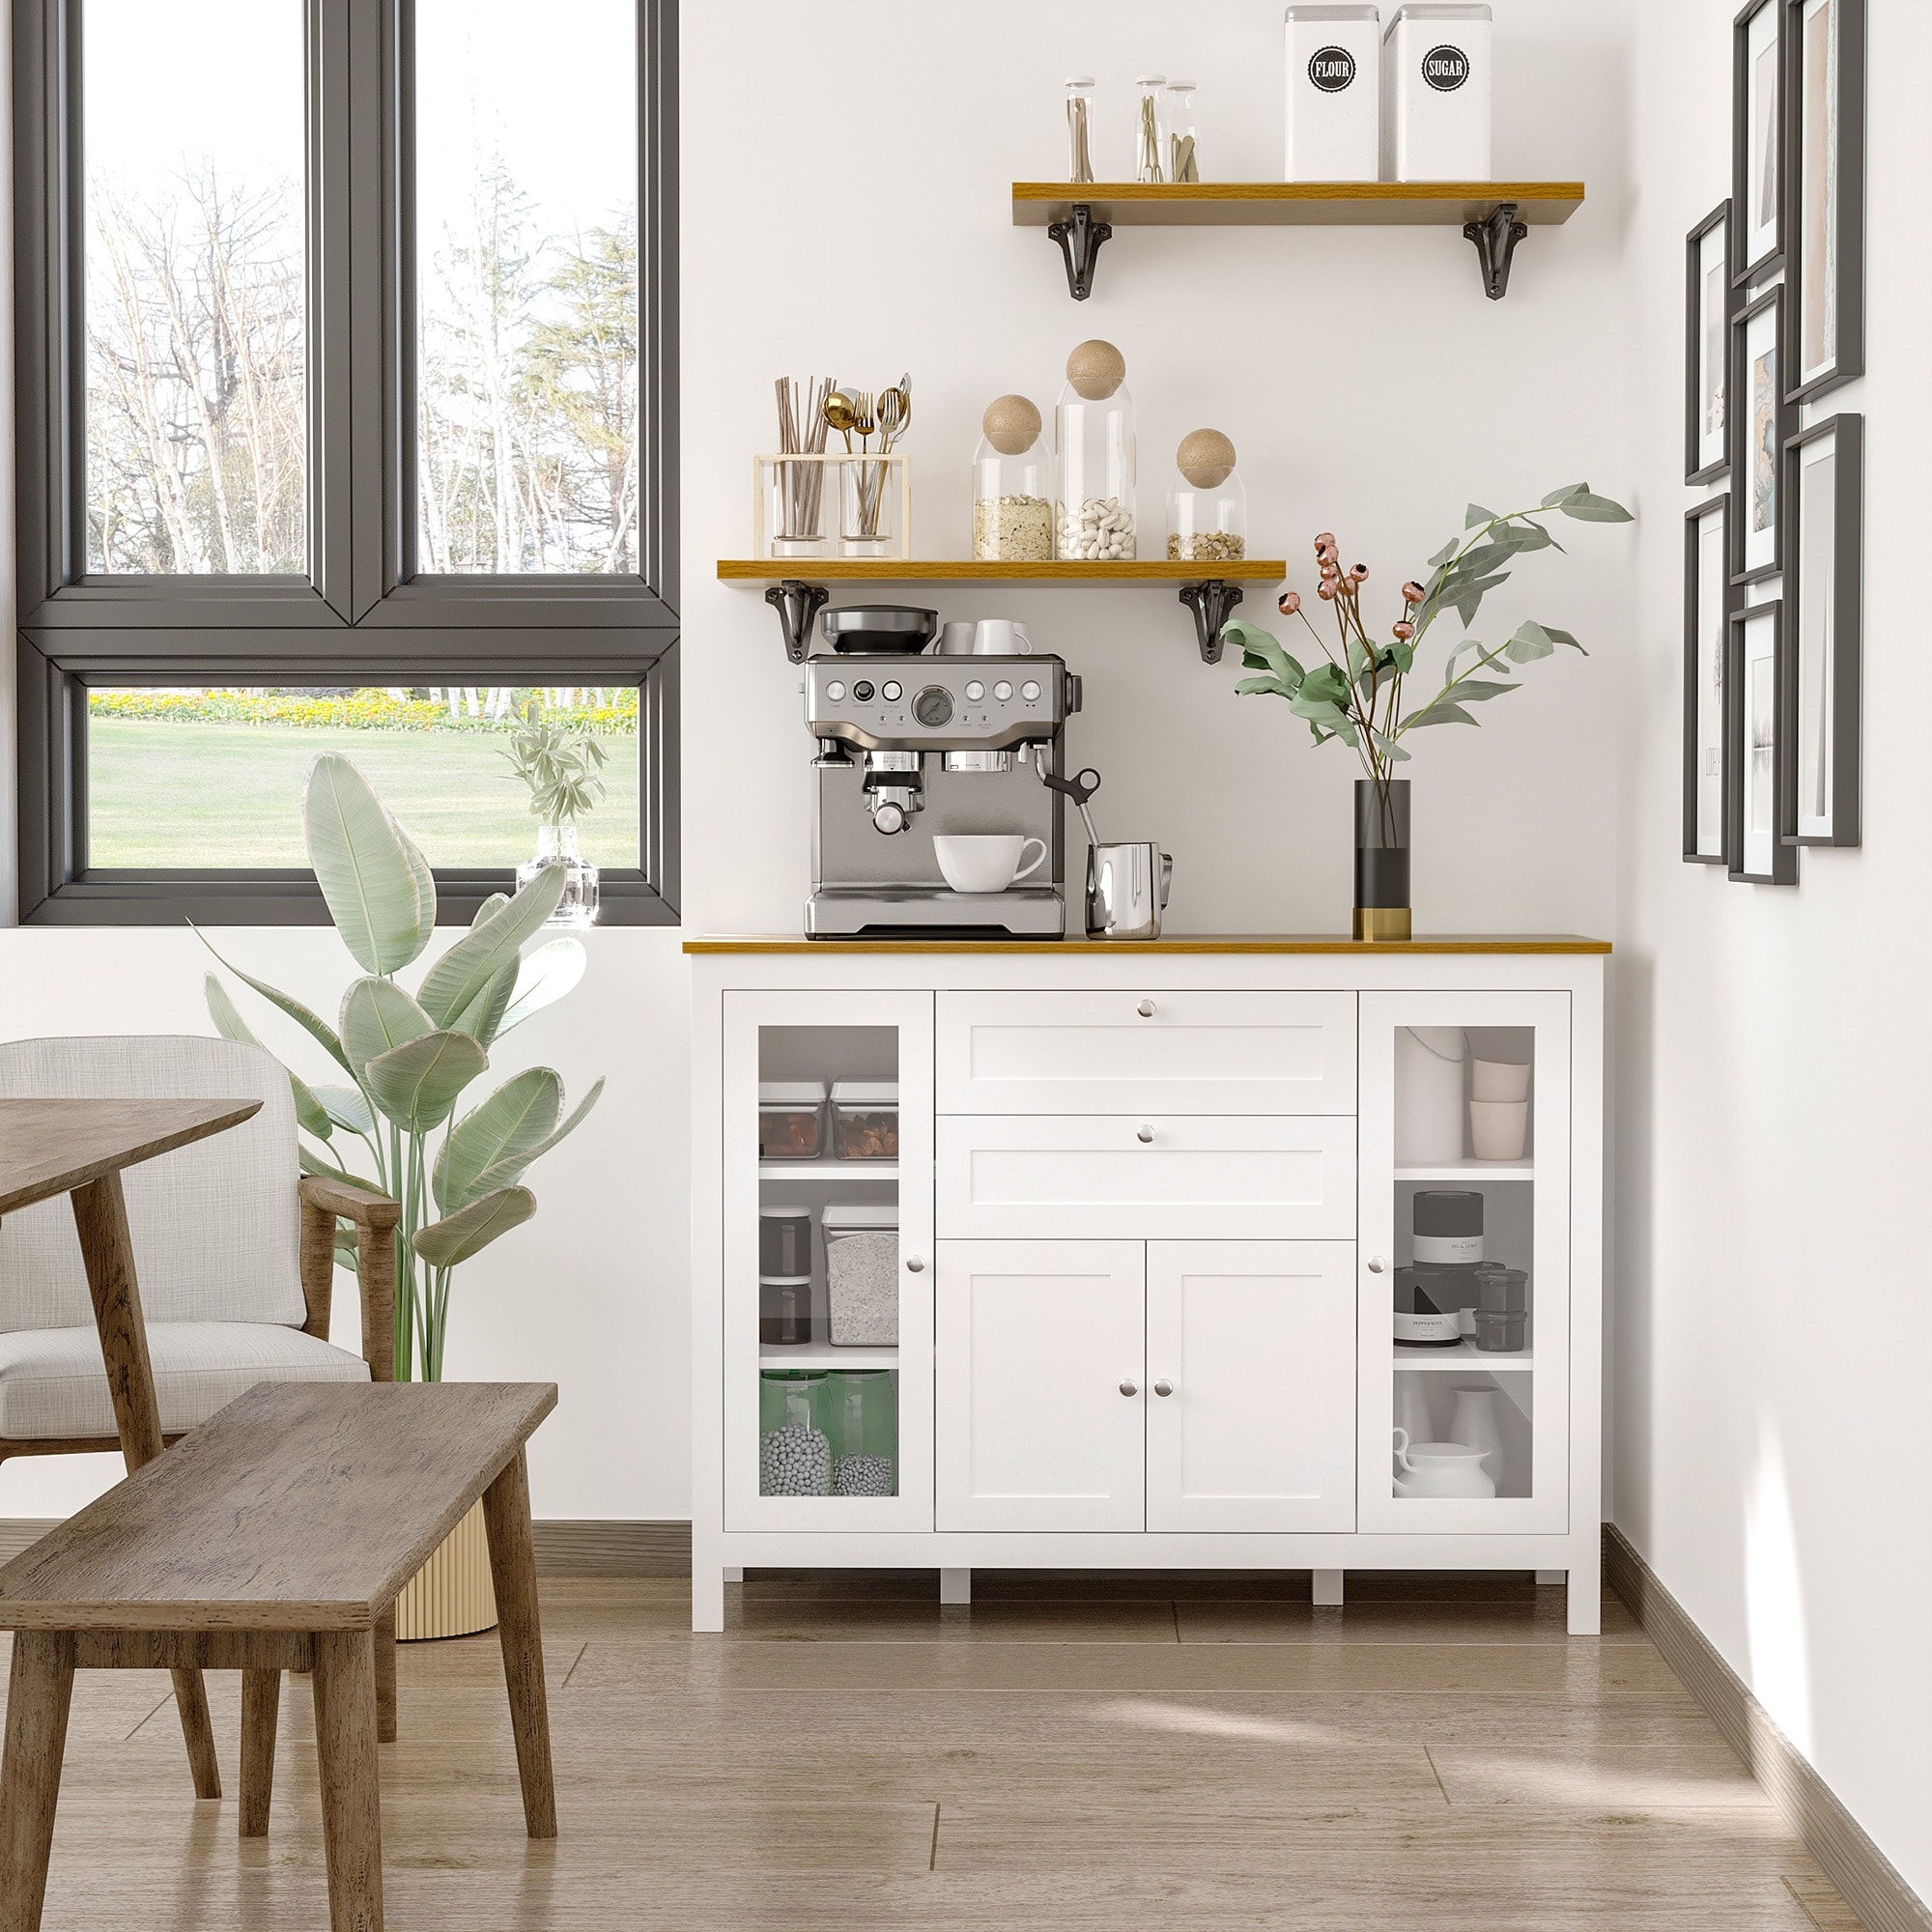 https://ak1.ostkcdn.com/images/products/is/images/direct/d48de94a90f80d5ed184cb56d9a67ddea5a2c6de/HOMCOM-47%22-Modern-Buffet-Cabinet%2C-Storage-Sideboard-with-Glass-Door%2C-Pull-Out-Drawers-and-Adjustable-Shelving-for-Kitchen.jpg